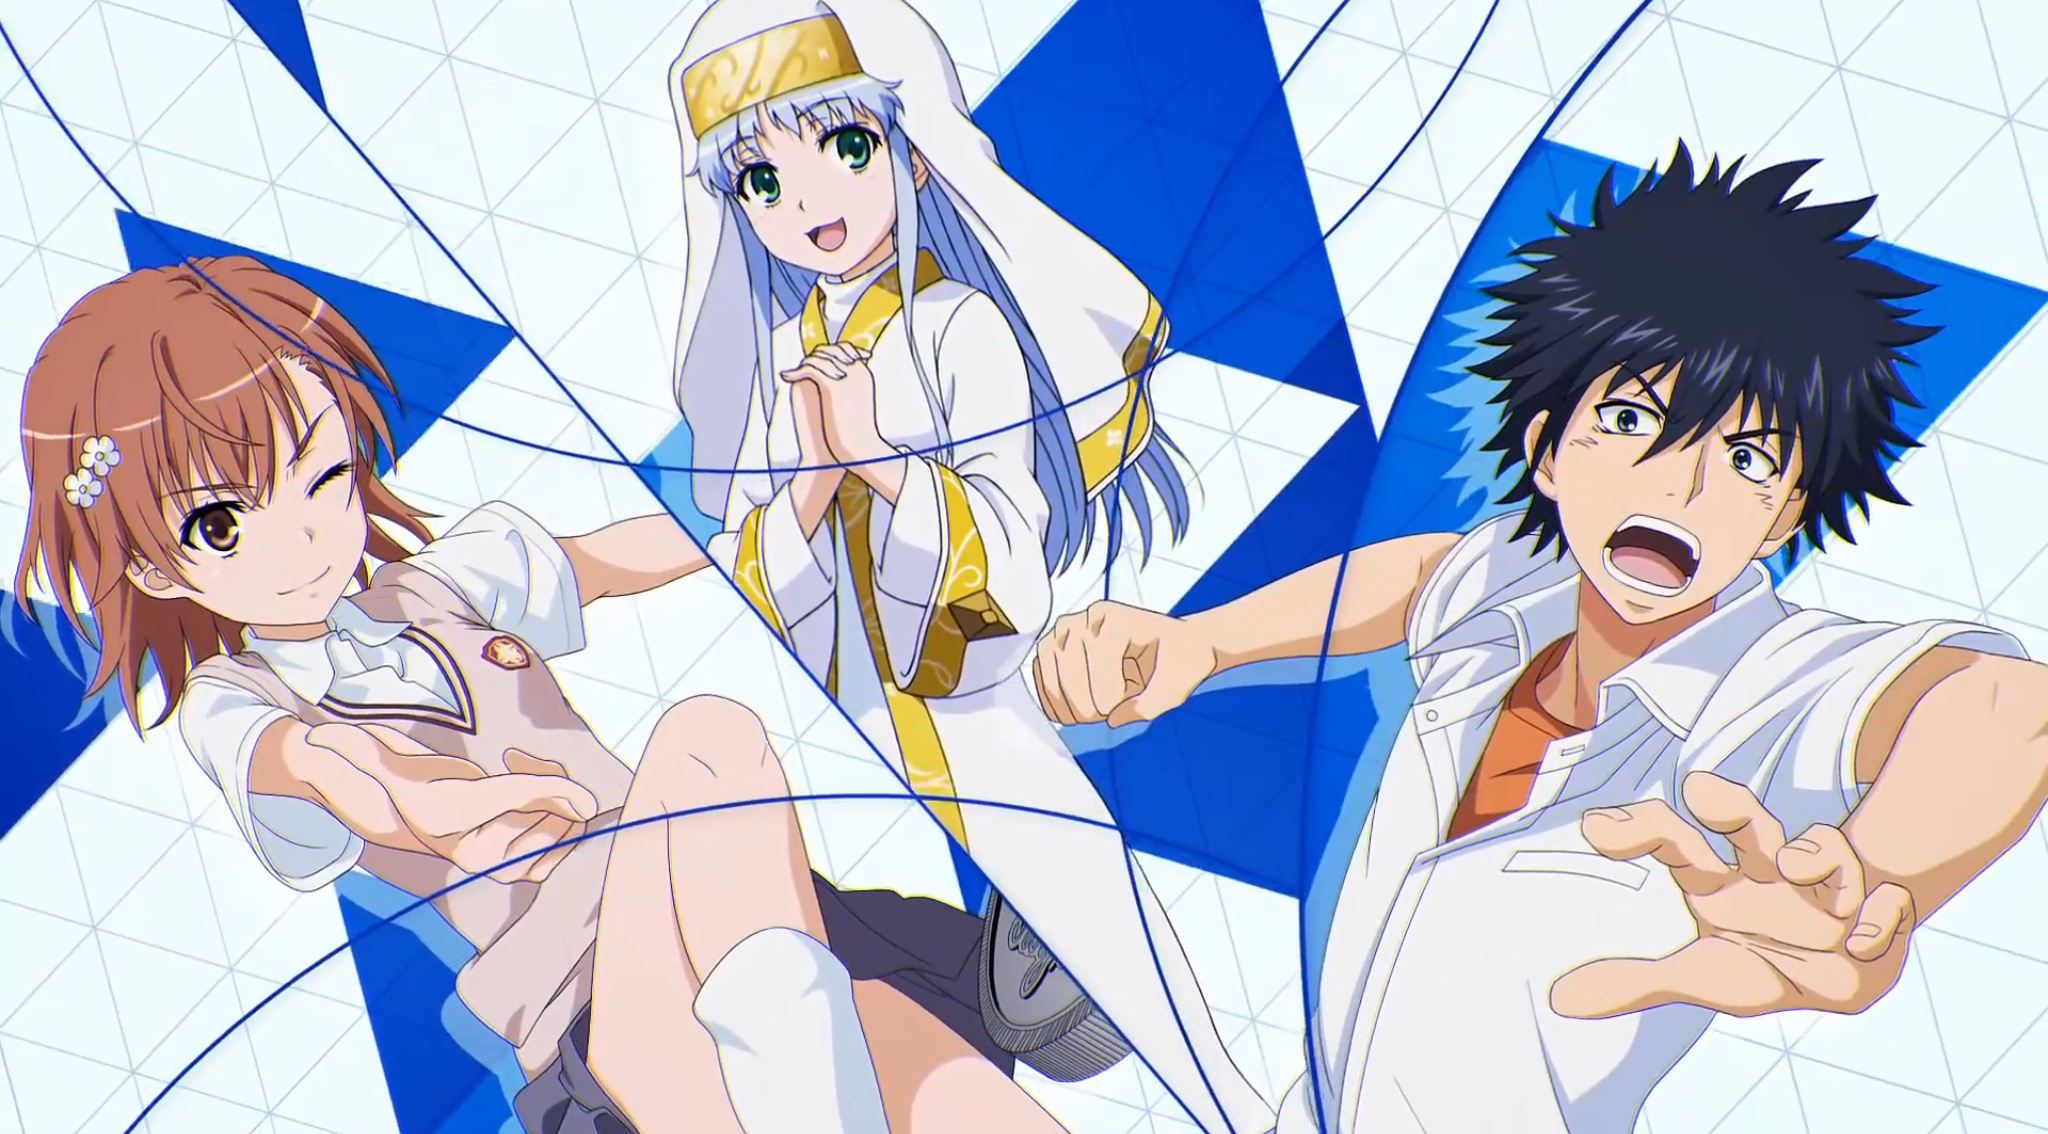 Square Enix Announces ‘A Certain Magical Index: Imaginary Fest’ for iOS and Android in Japan Set for a 2019 Release